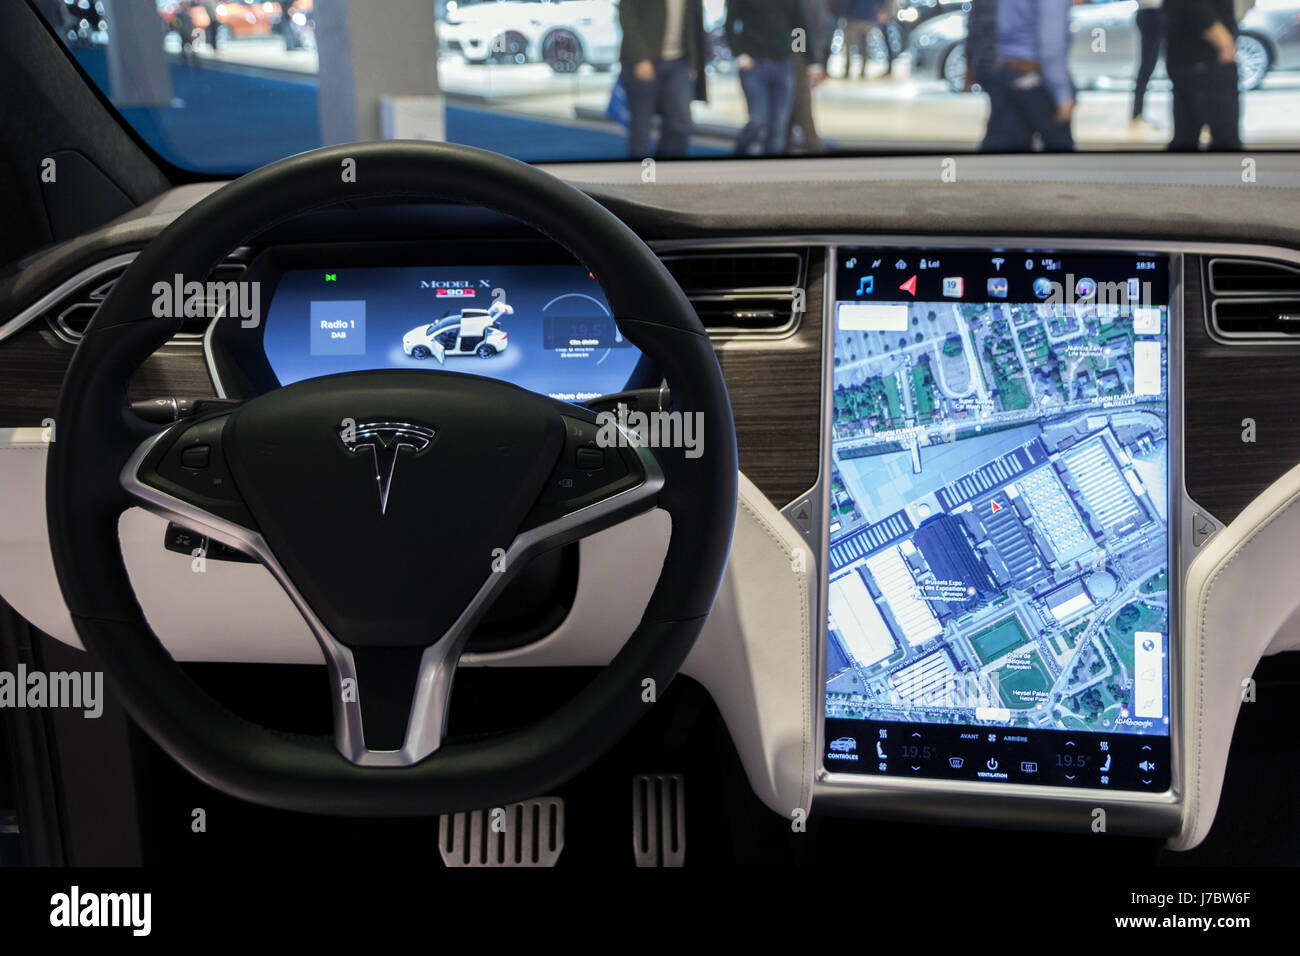 BRUSSELS - JAN 19, 2017: Interior dashboard with navigation of the Tesla Model X car on display at the Motor Show Brussels. Stock Photo